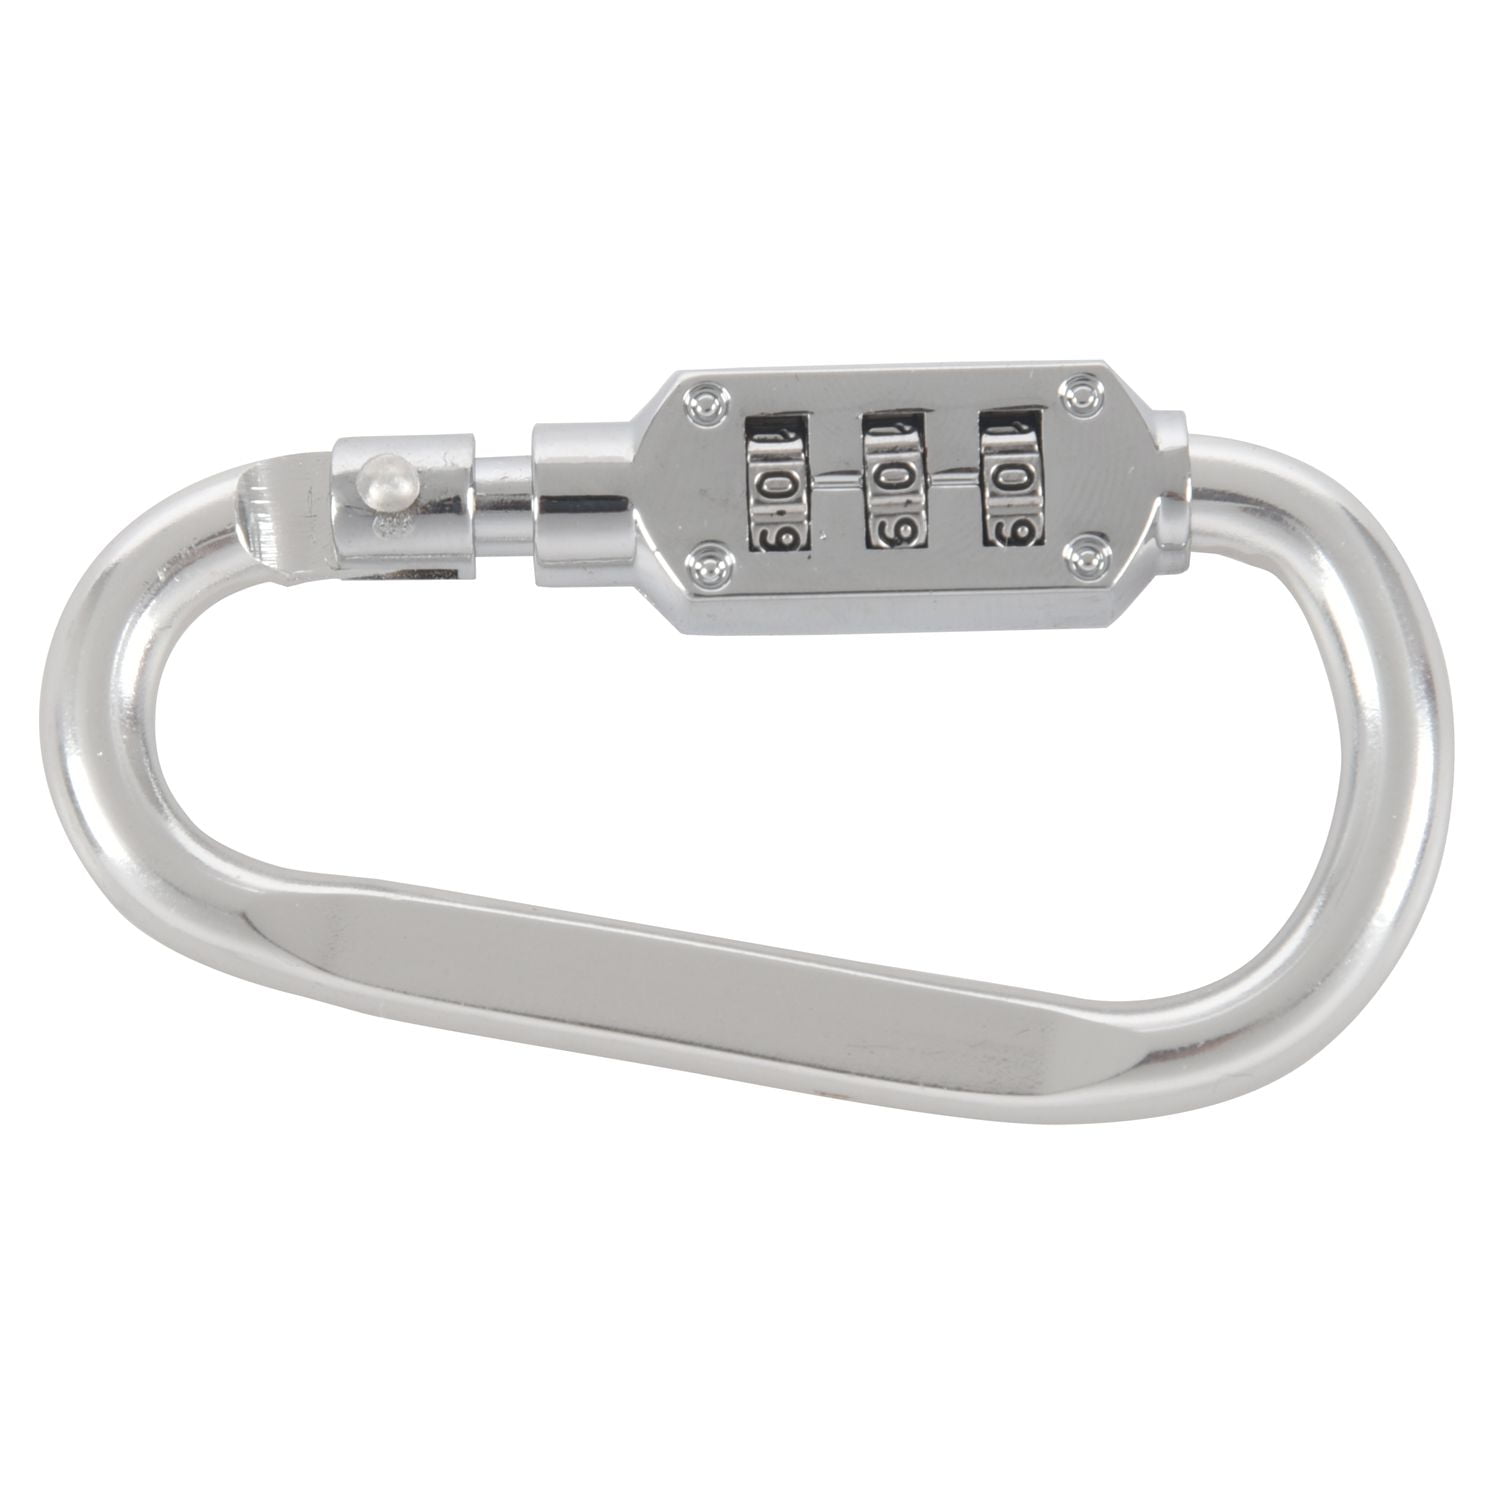 with combination padlock 3 digits numbers padlock carabiners silver X2J9